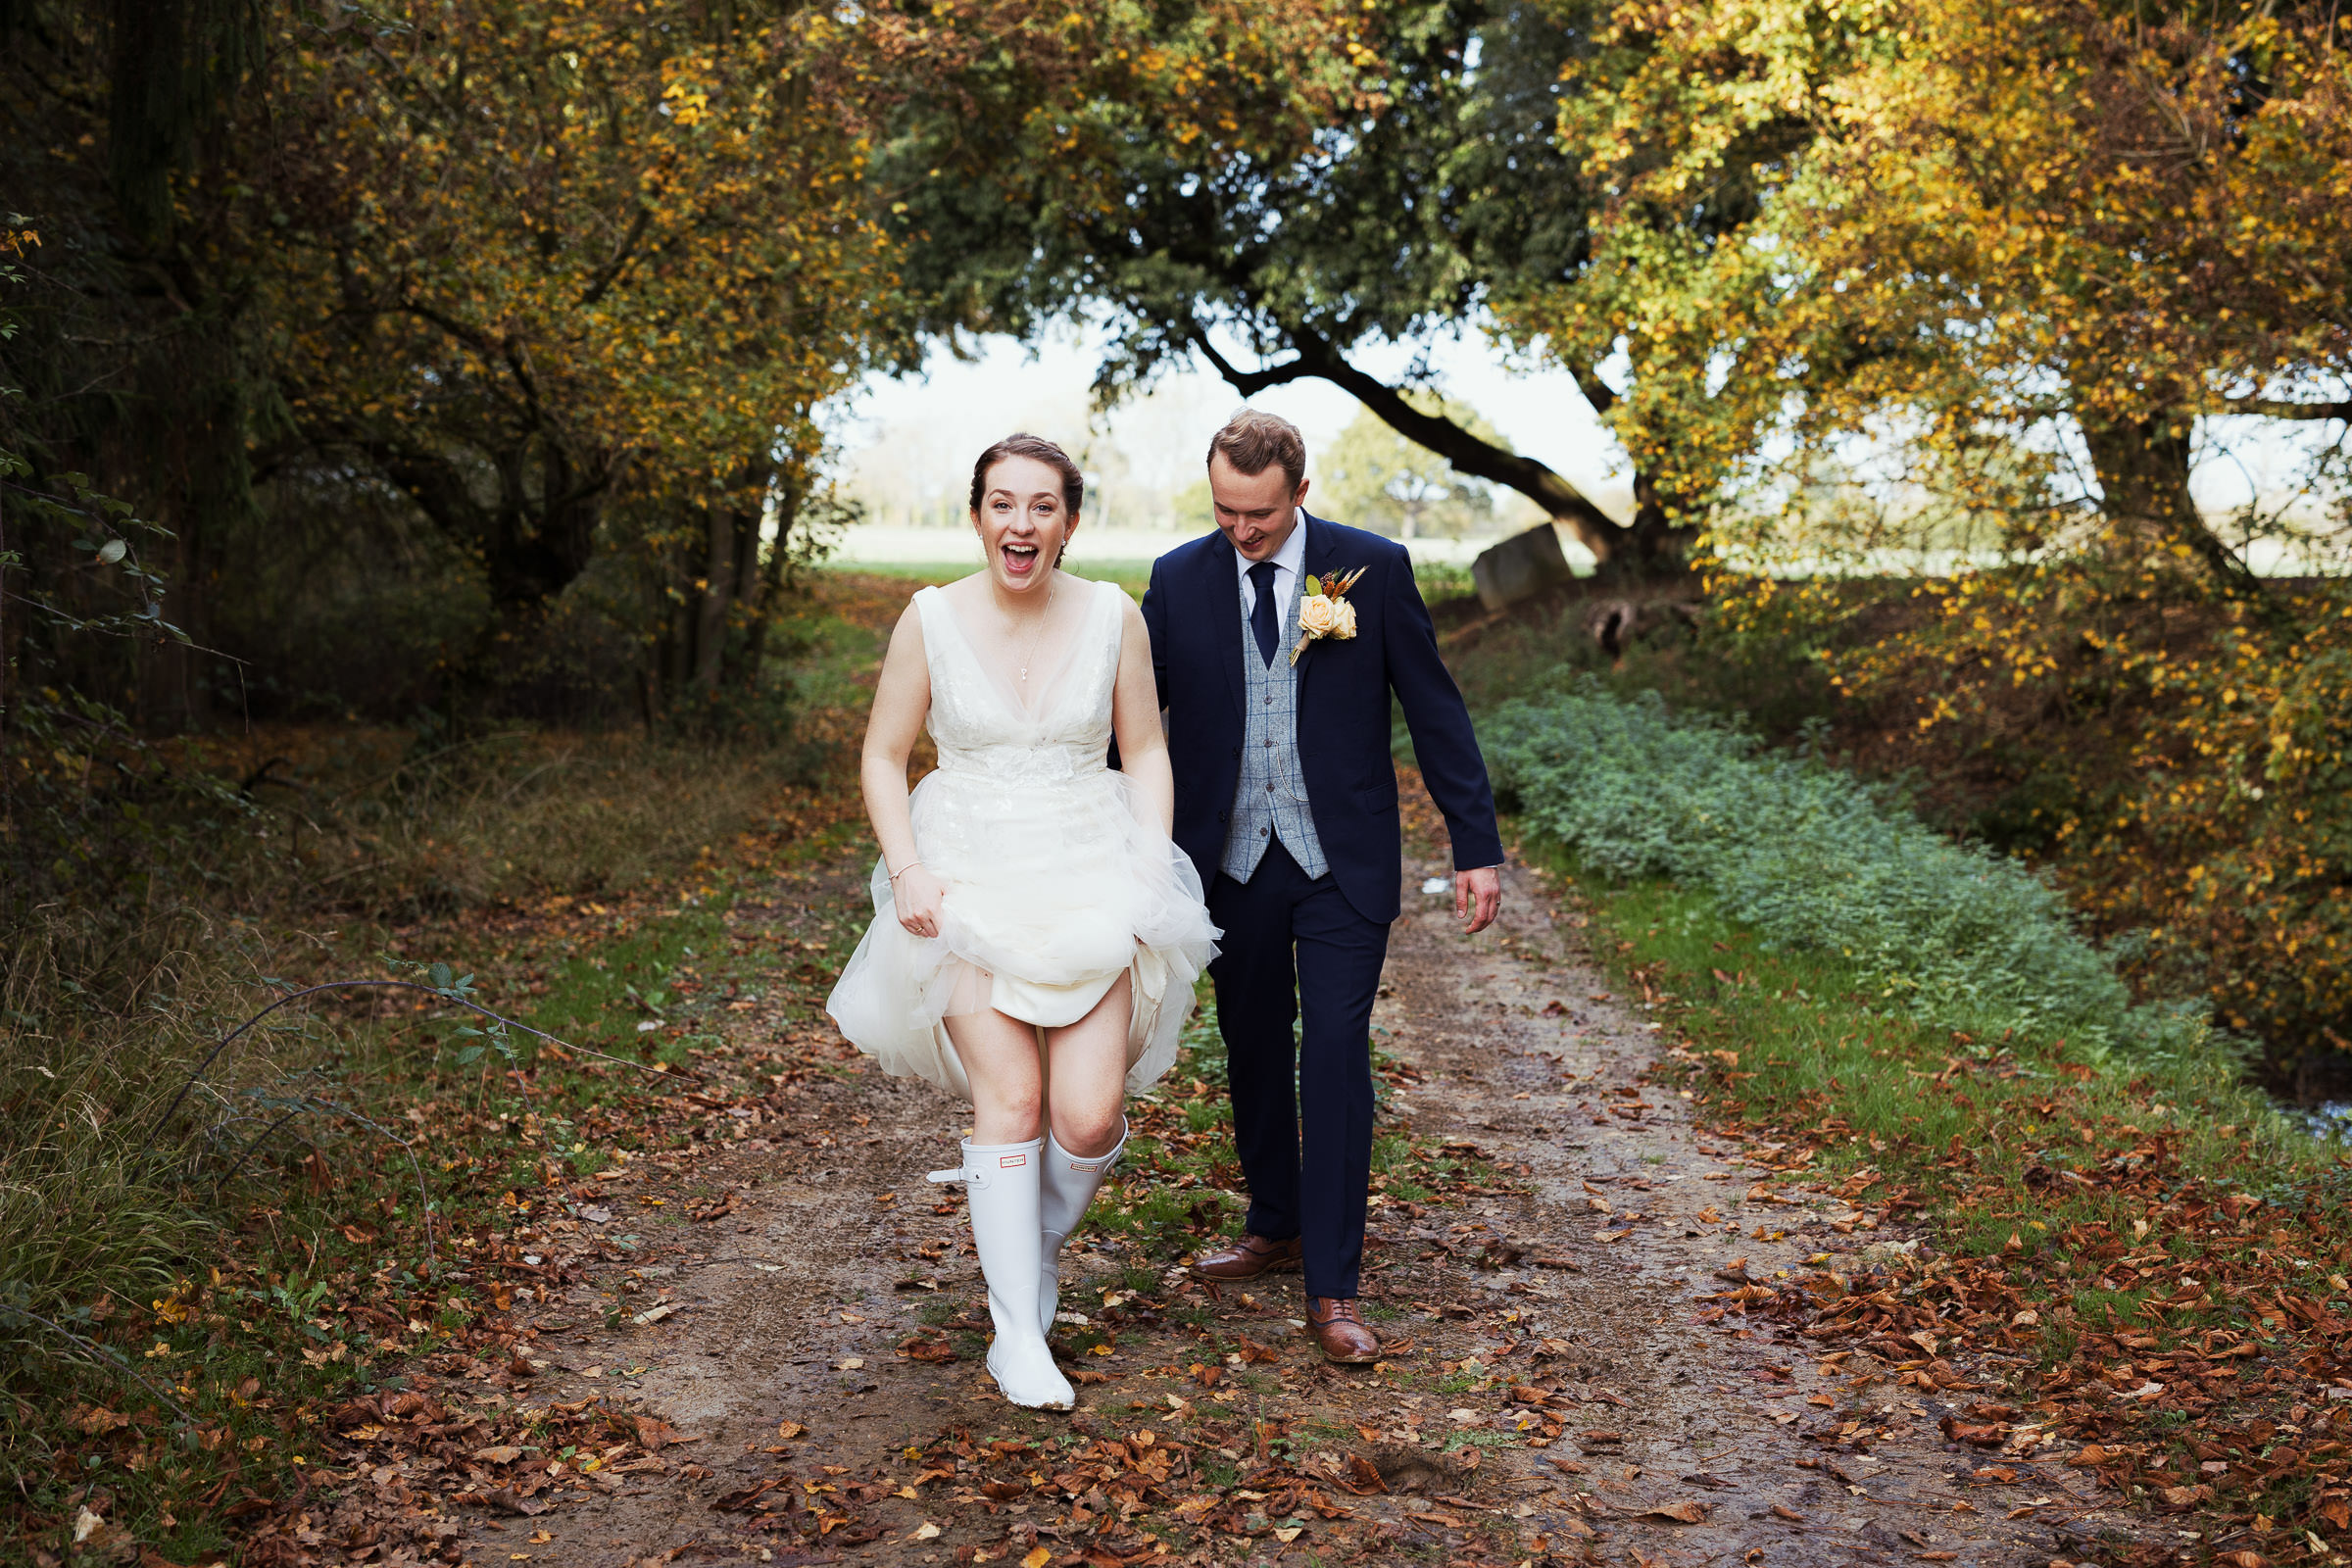 A bride holding her Jenny Packham dress wearing Hunter wellies with her husband. Walking through the leaves at Essex wedding venue Houchins.